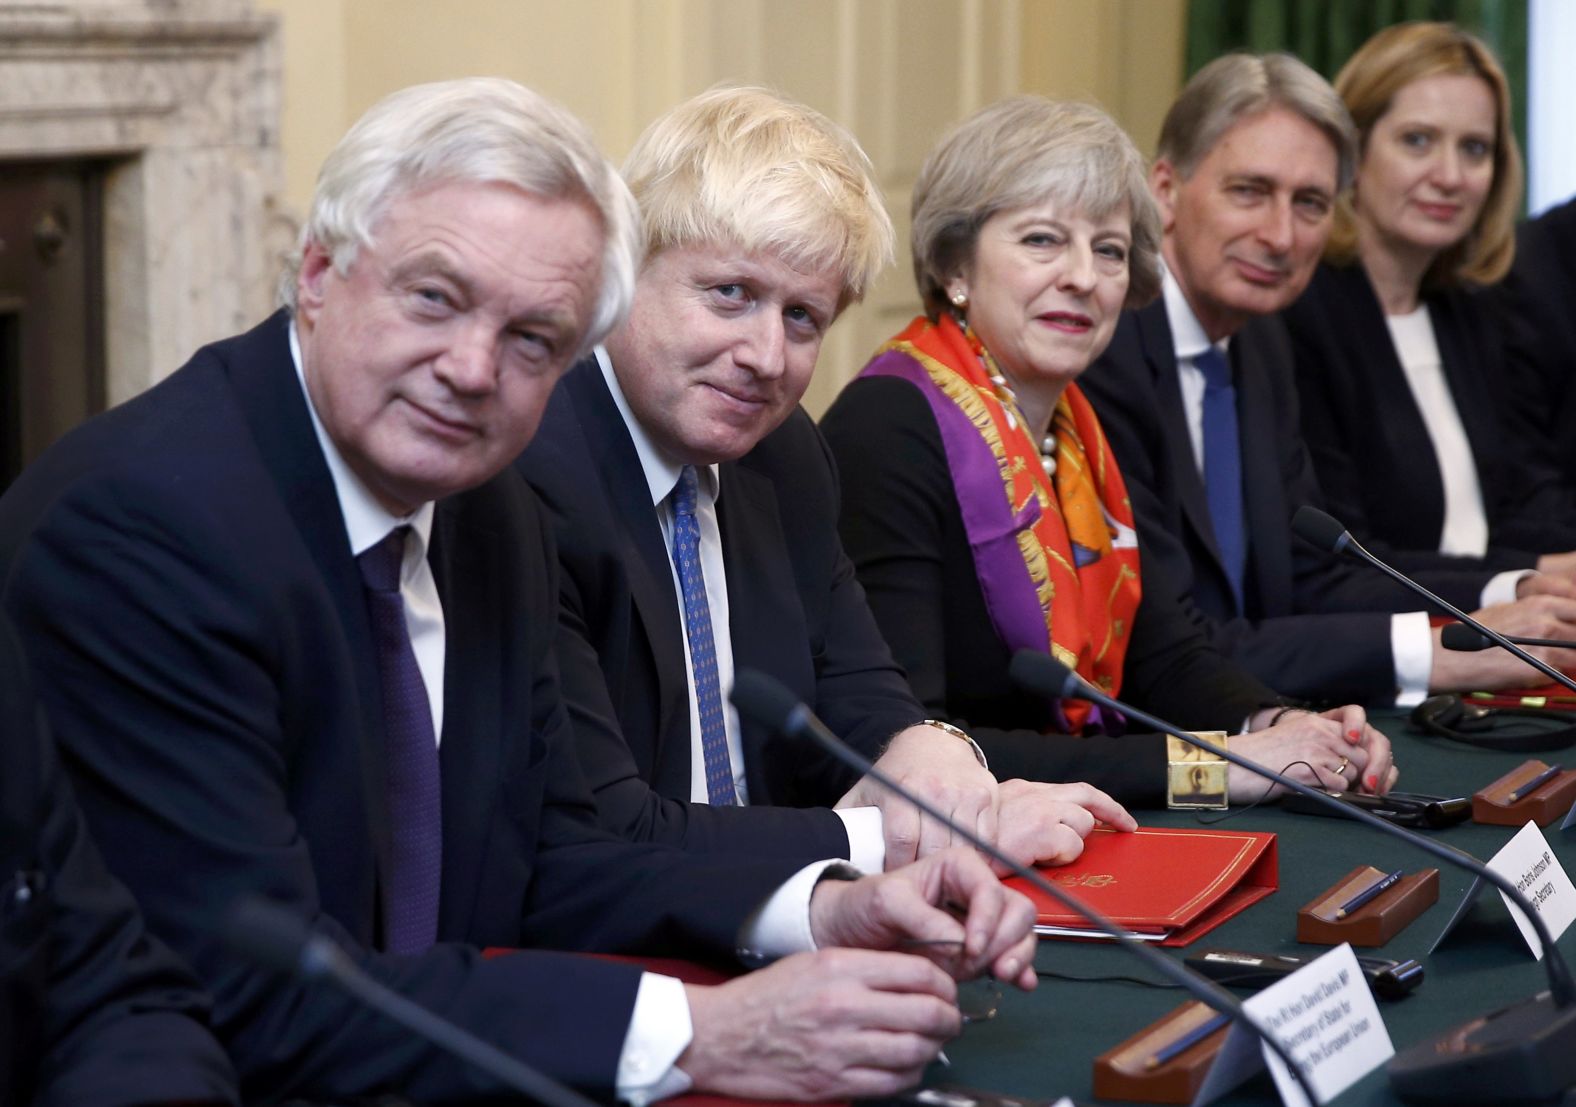 Johnson sits next to Prime Minister Theresa May during a Cabinet meeting in November 2016. Johnson was May's foreign secretary for two years before resigning over her handling of Brexit.